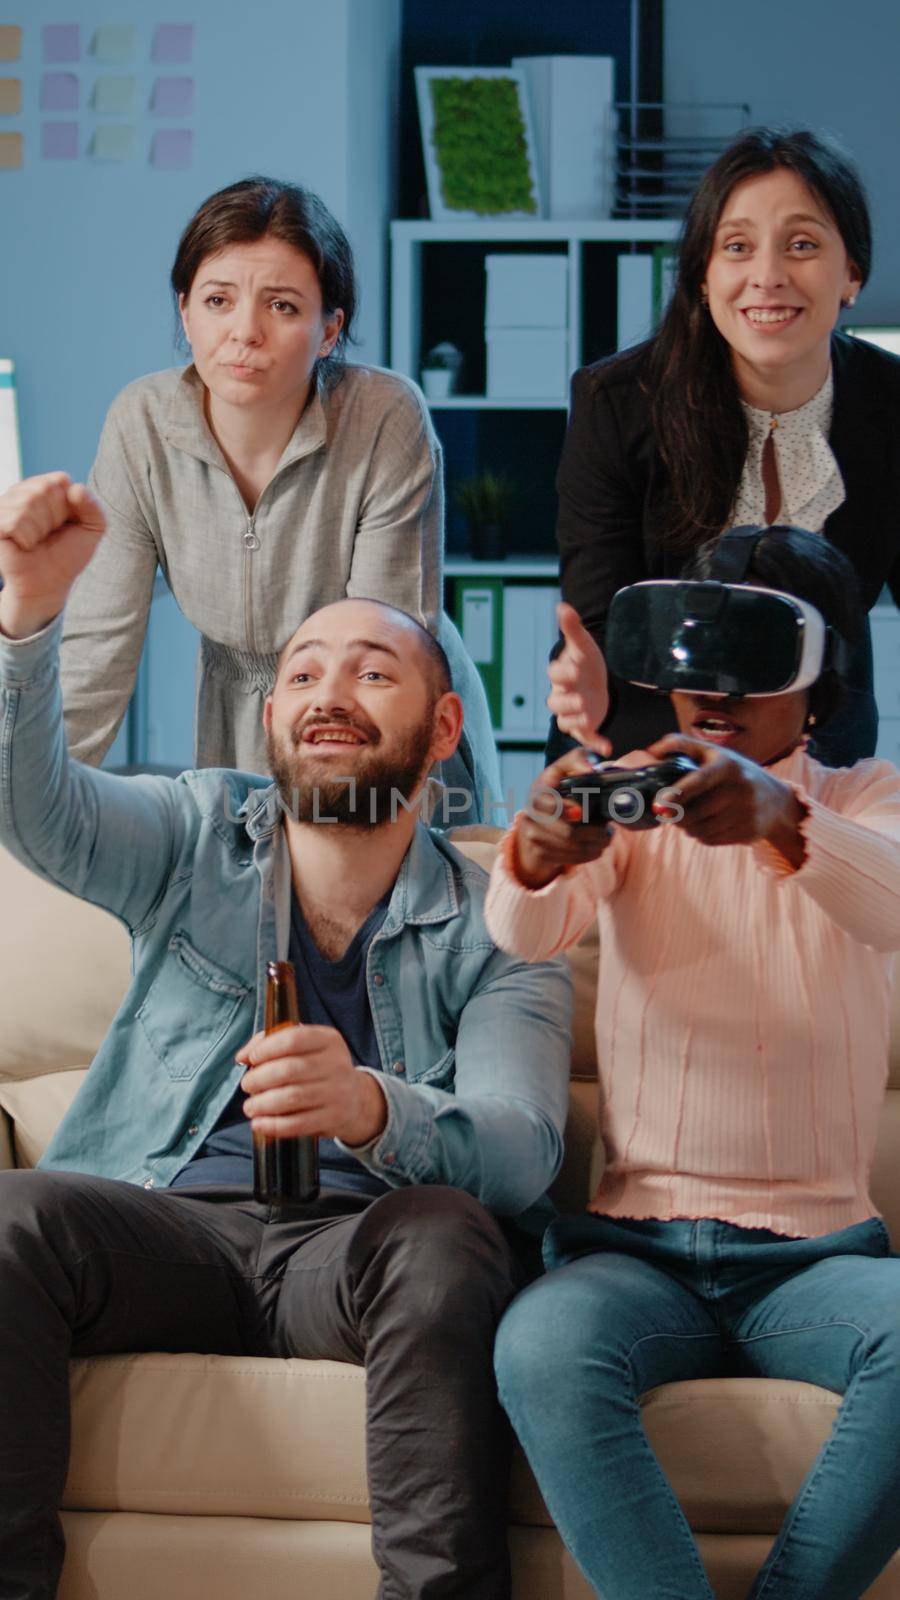 African american woman using vr glasses and controller to play video games while colleagues cheering for entertainment after work. Coworkers playing with technology to do fun activity